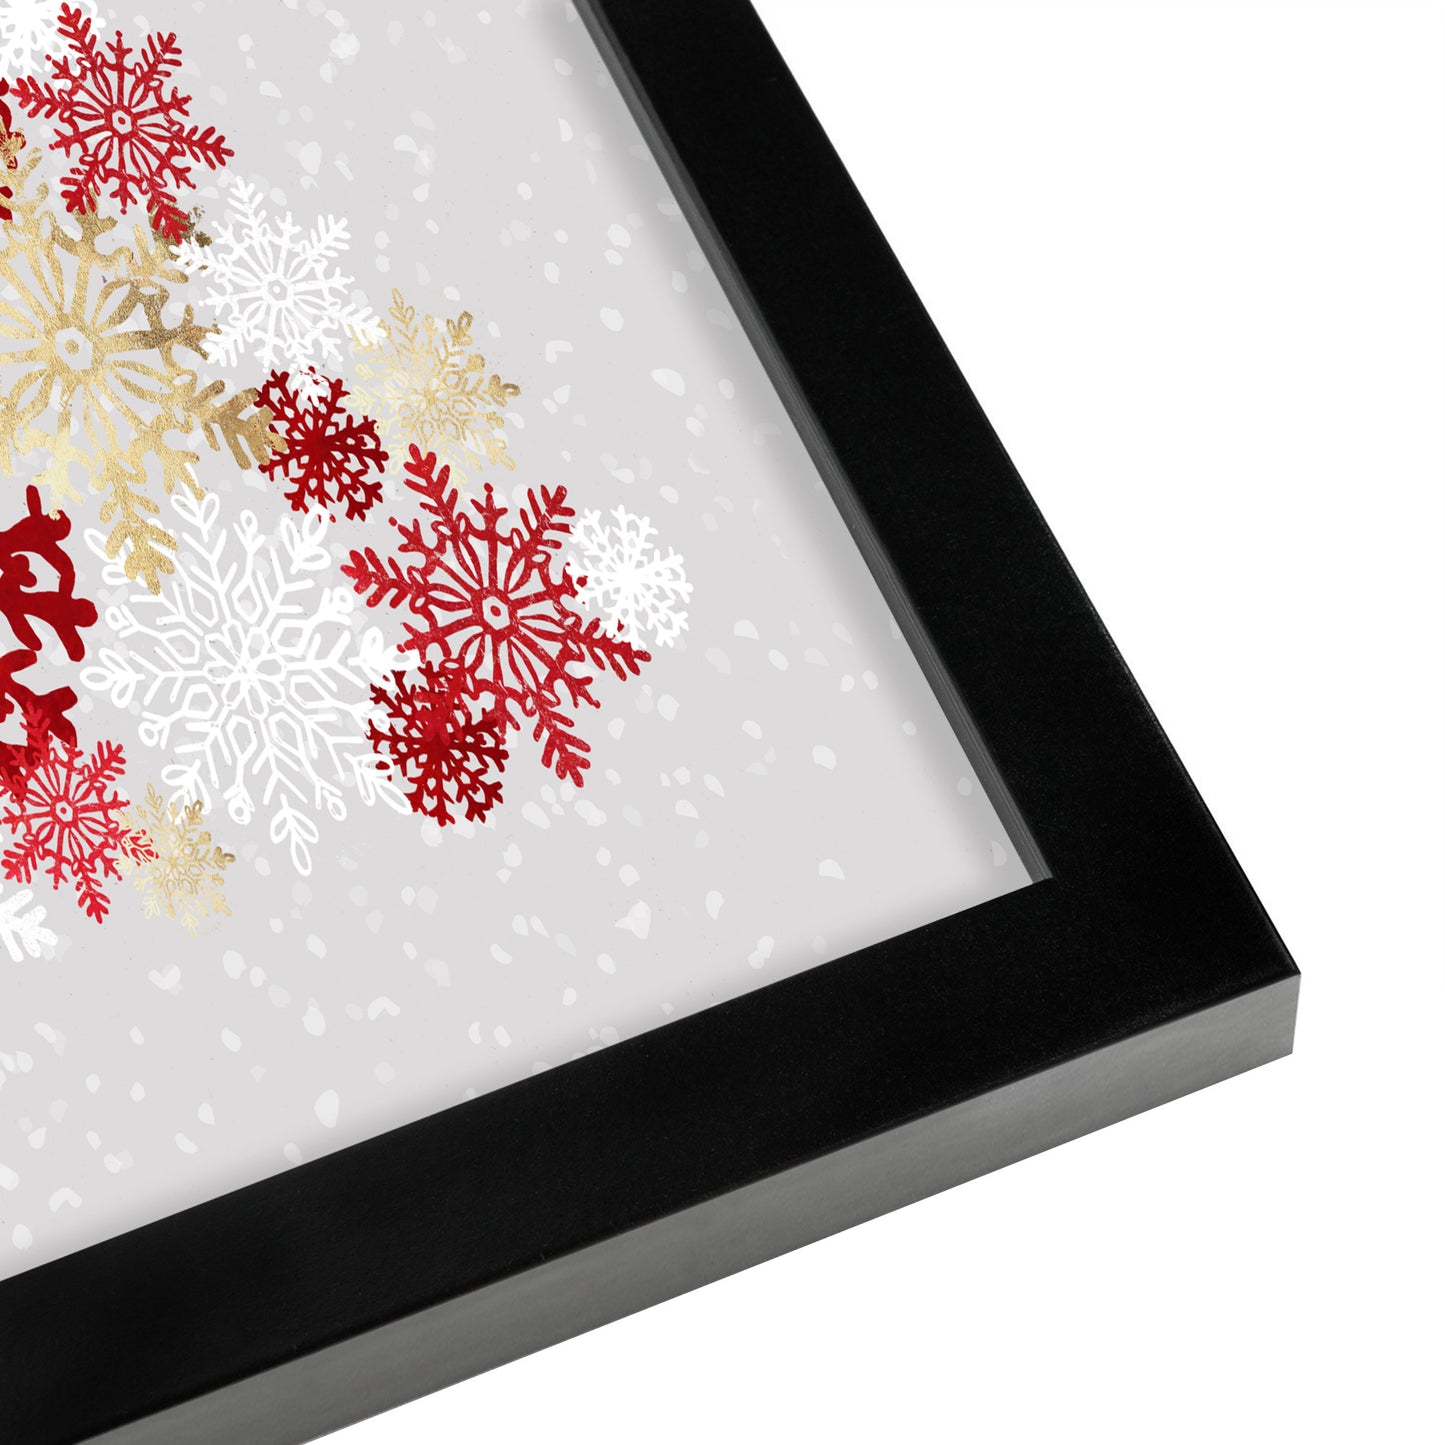 Silver Snowflakes II Art: Canvas Prints, Frames & Posters